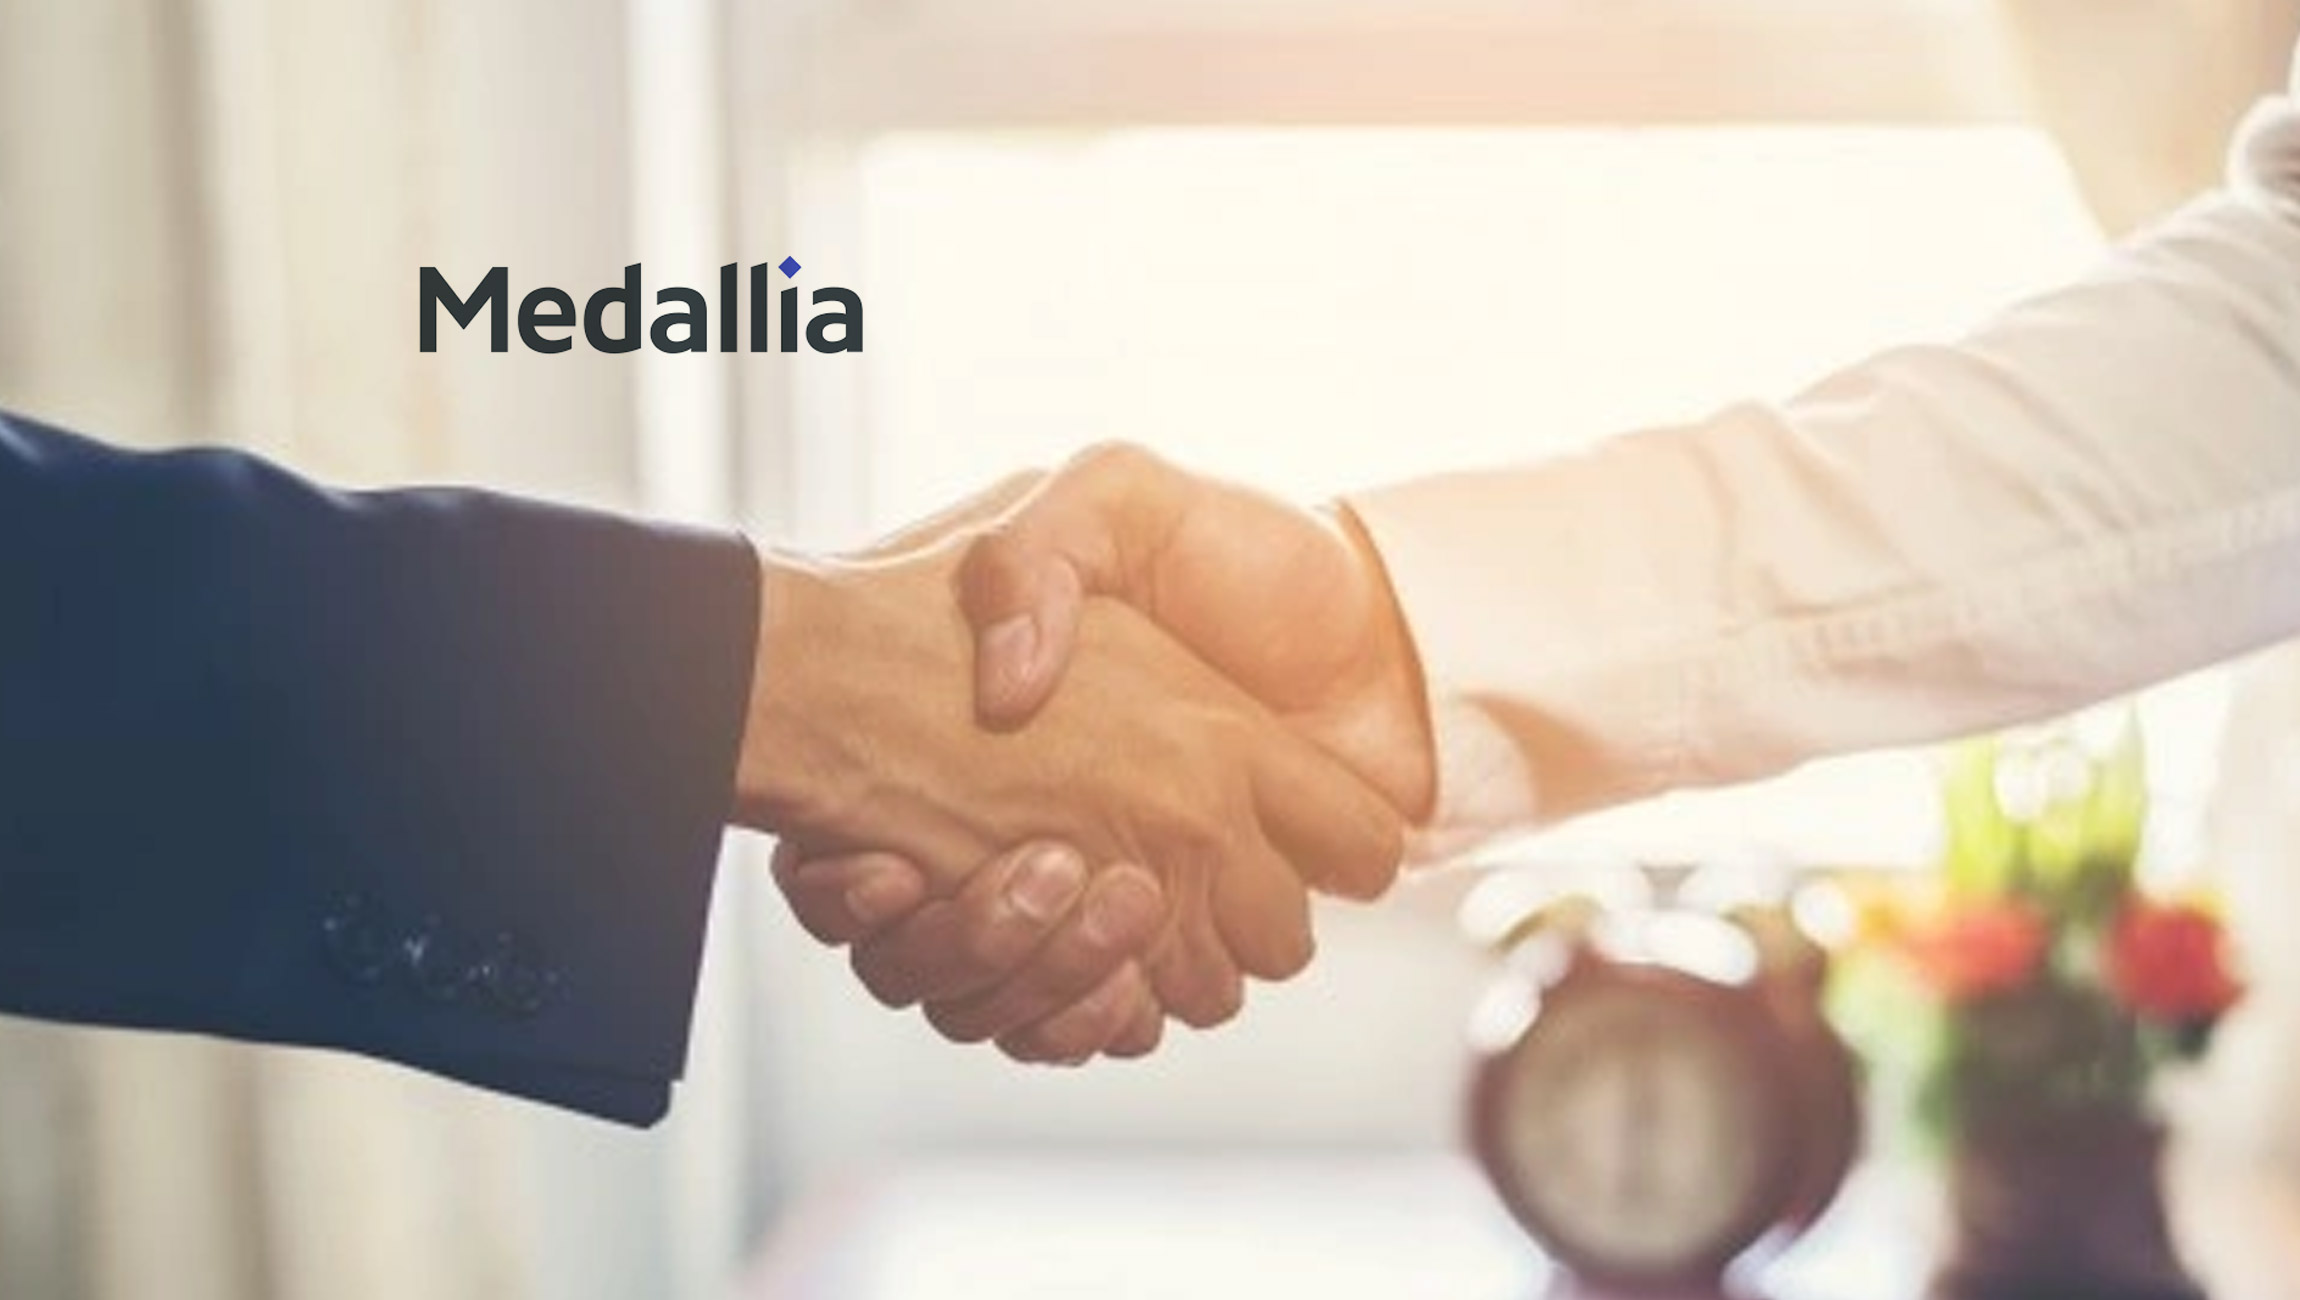 Medallia Announces Partnerships to Enhance Agent Assistance for Customer Service